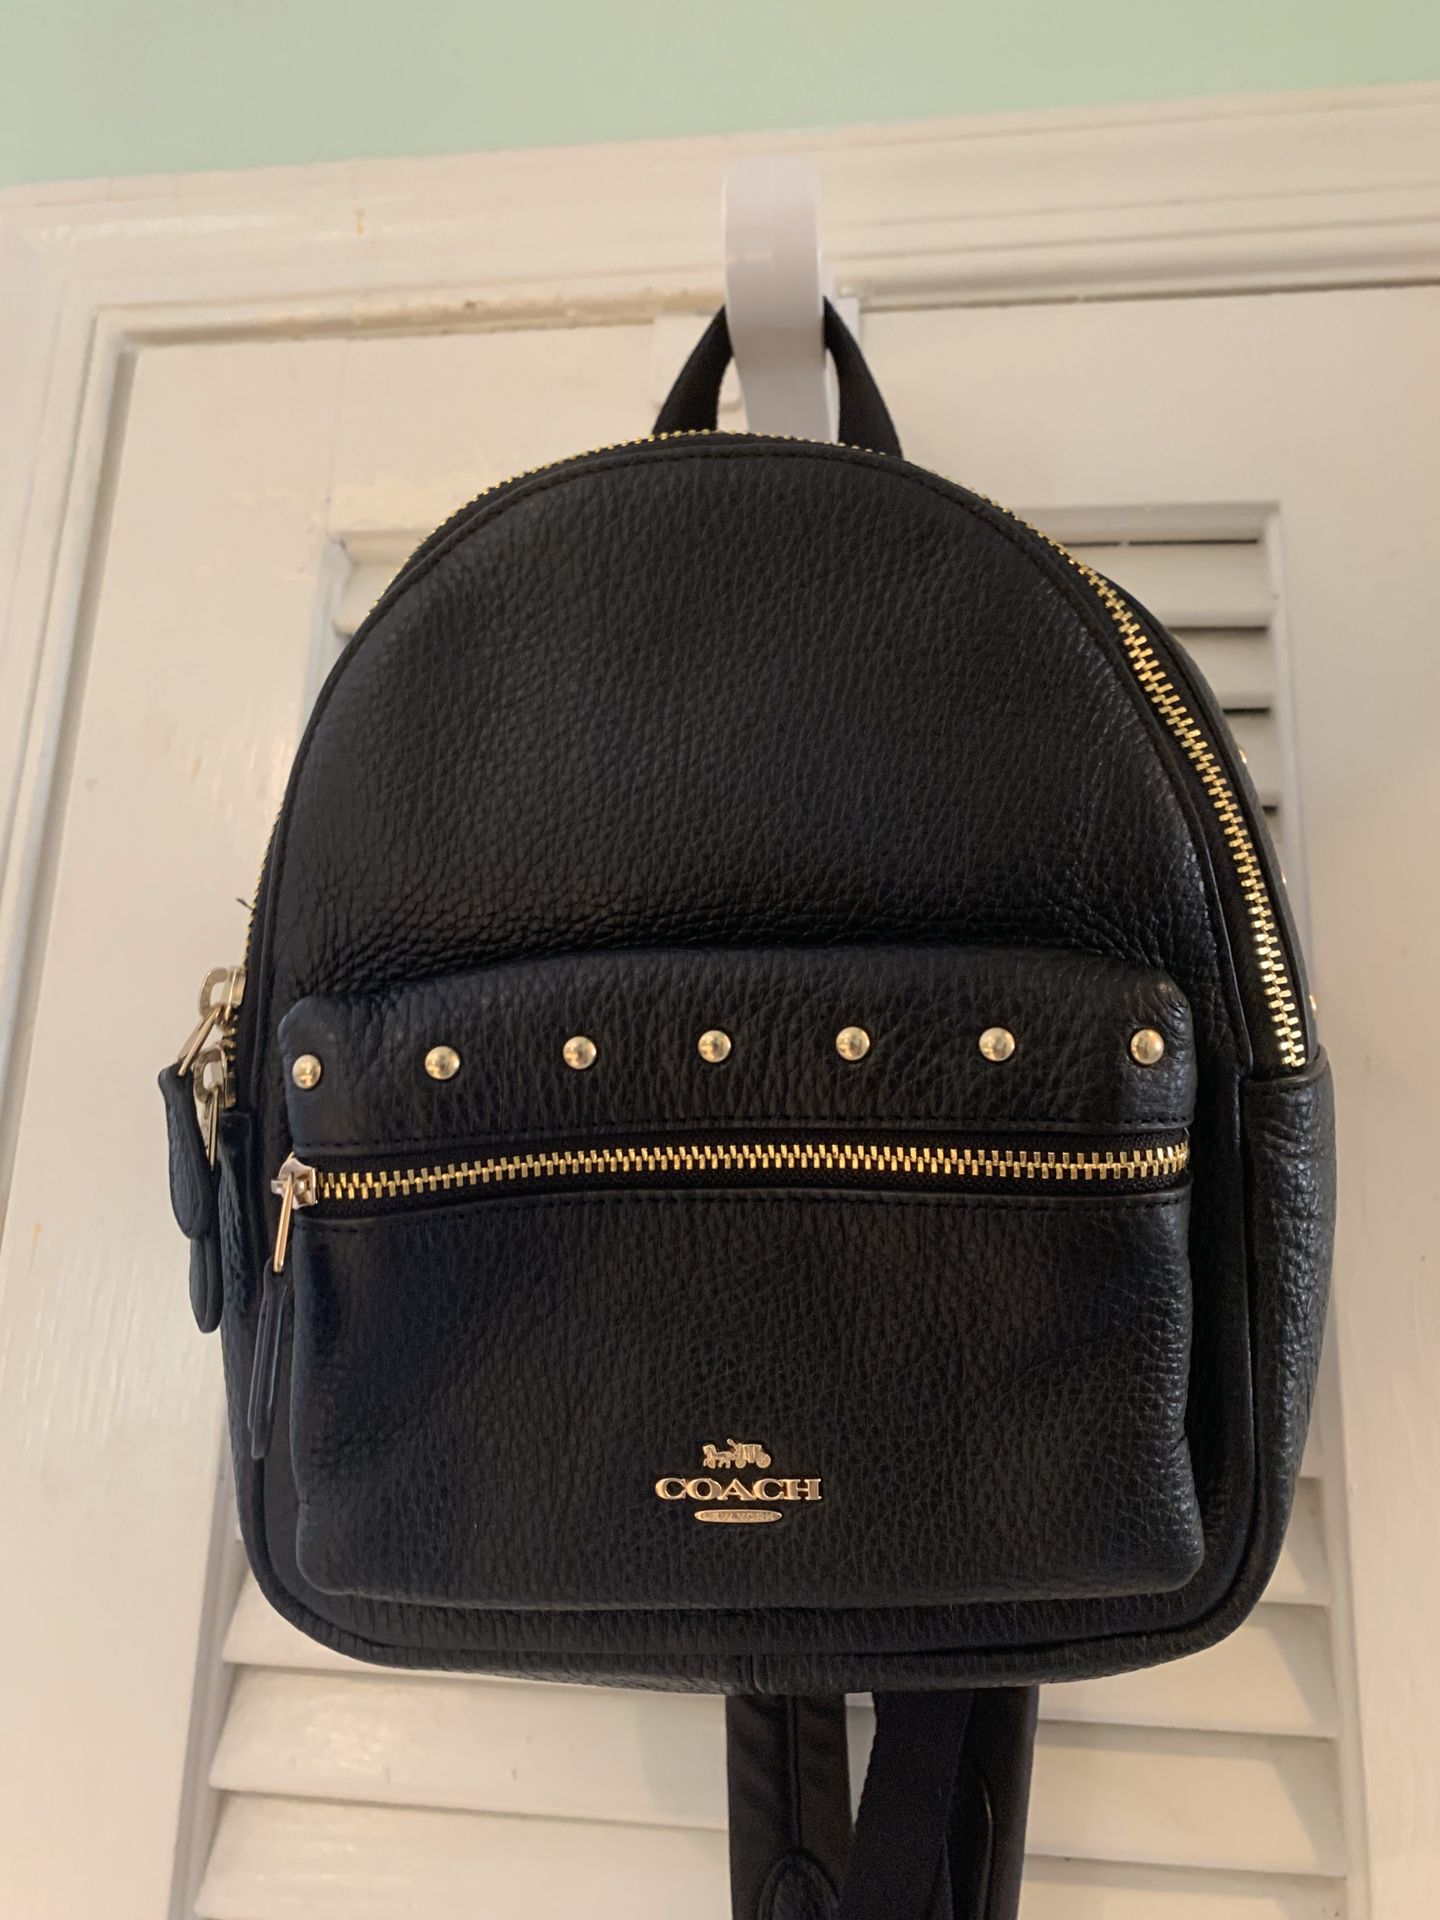 Coach black pebbled leather backpack NEW